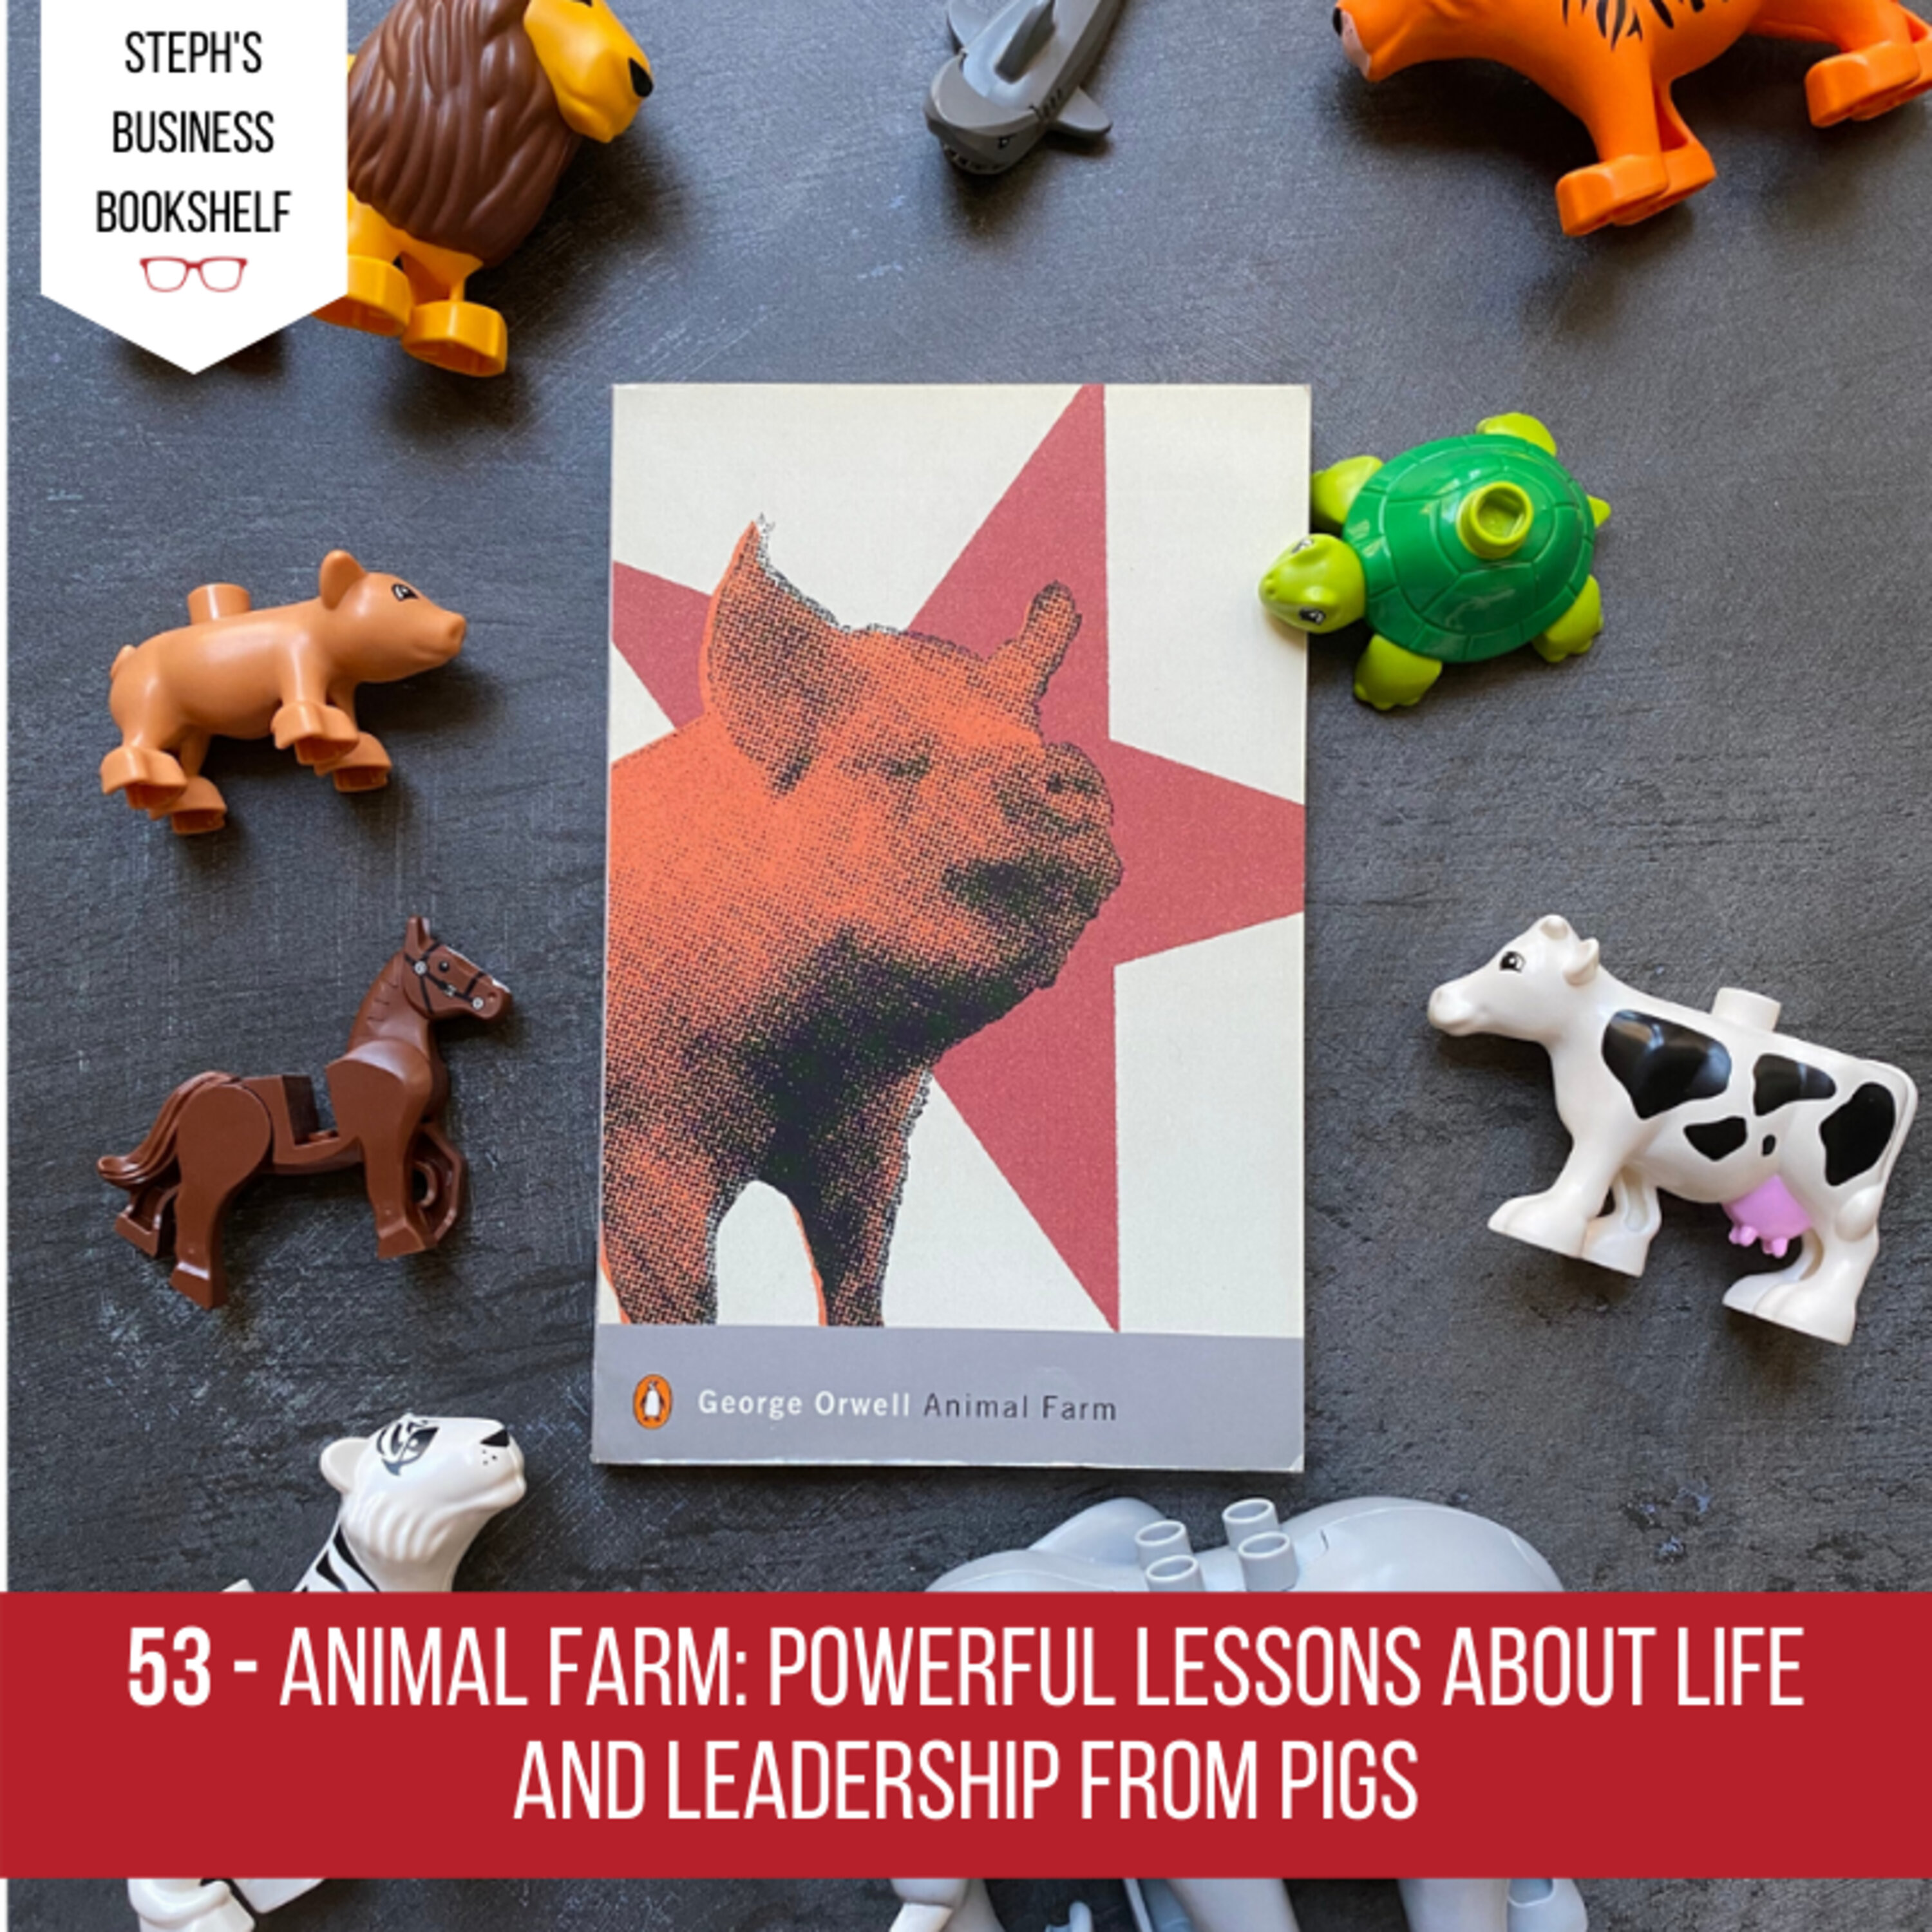 Animal Farm by George Orwell: Powerful lessons about life and leadership from pigs